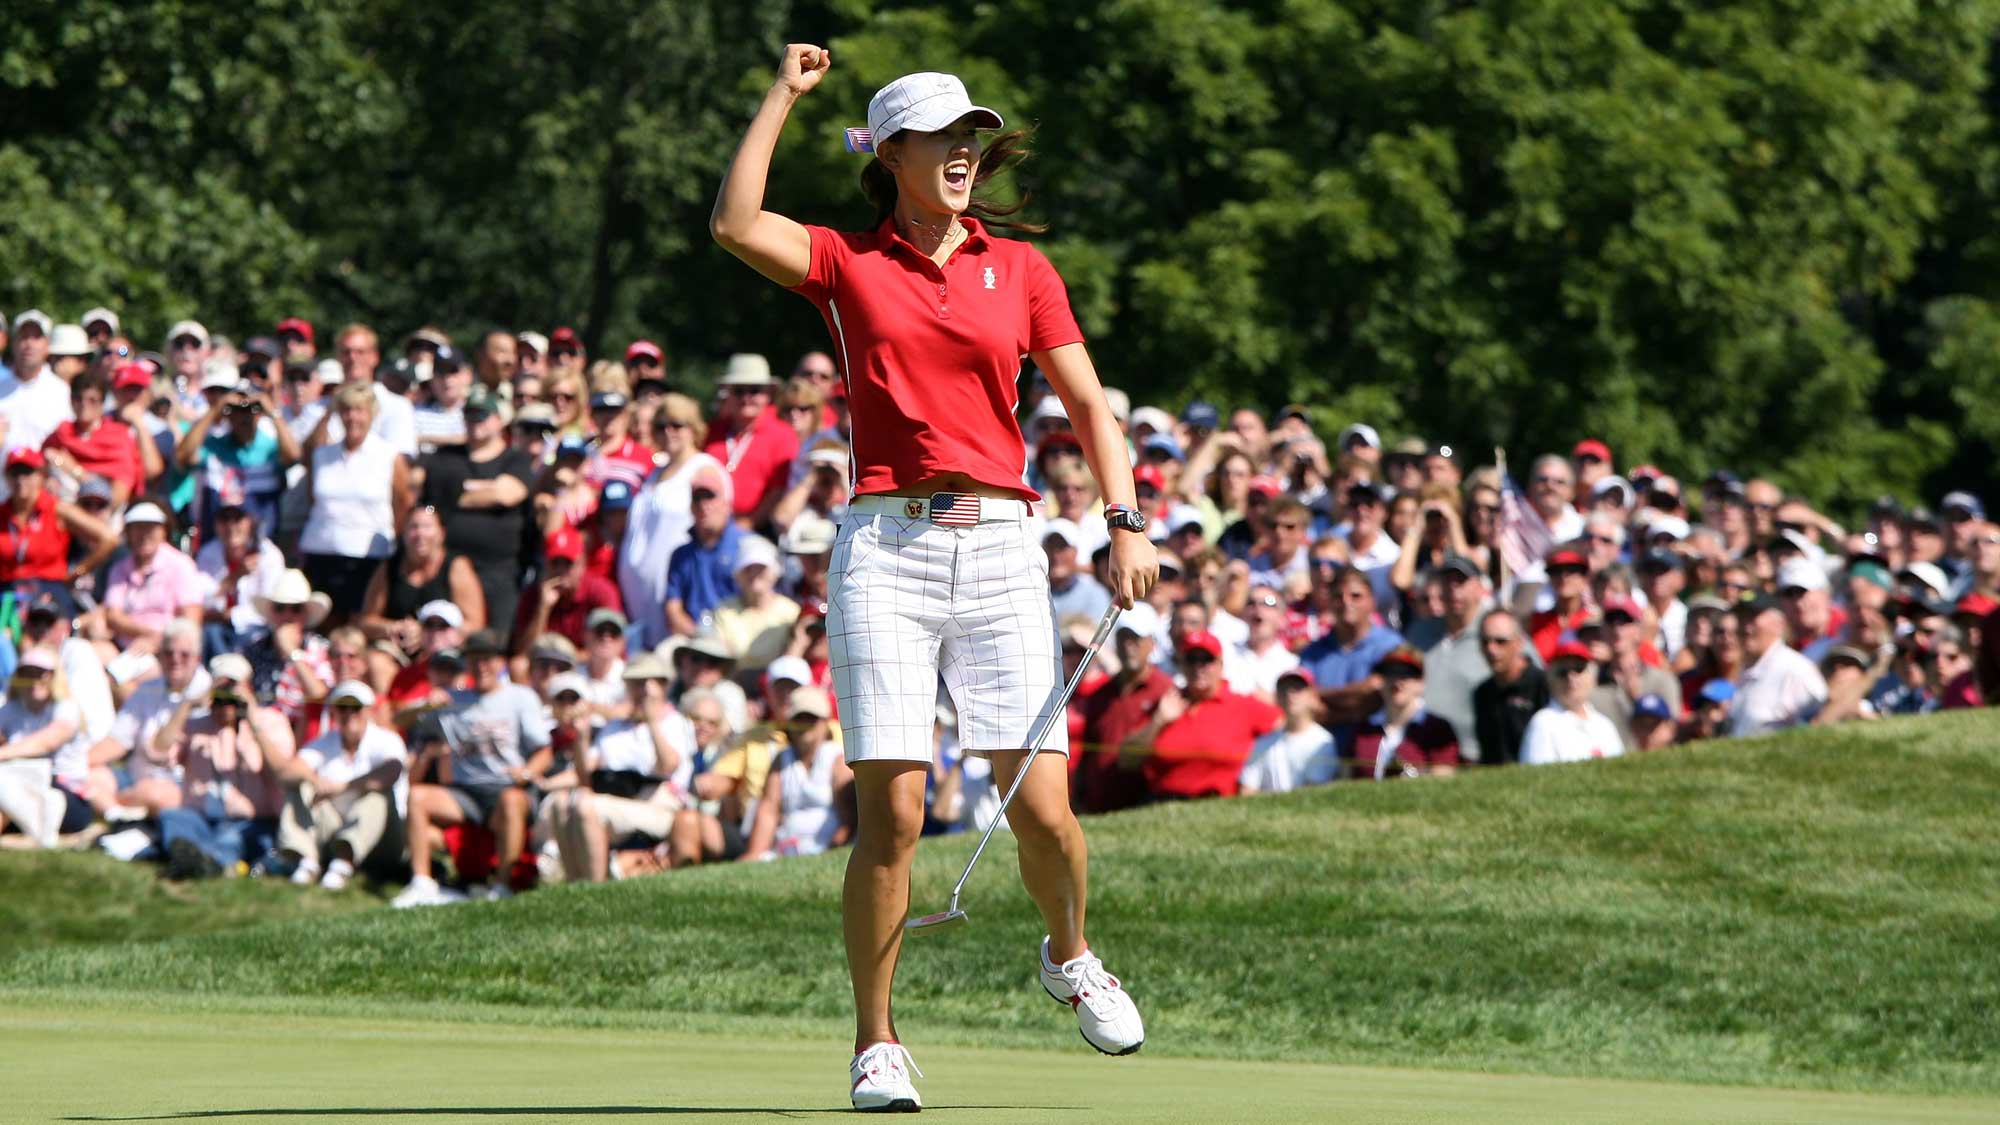 Michelle Wie of the USA birdies the third hole during the Sunday singles matches at the 2009 Solheim Cup Matches